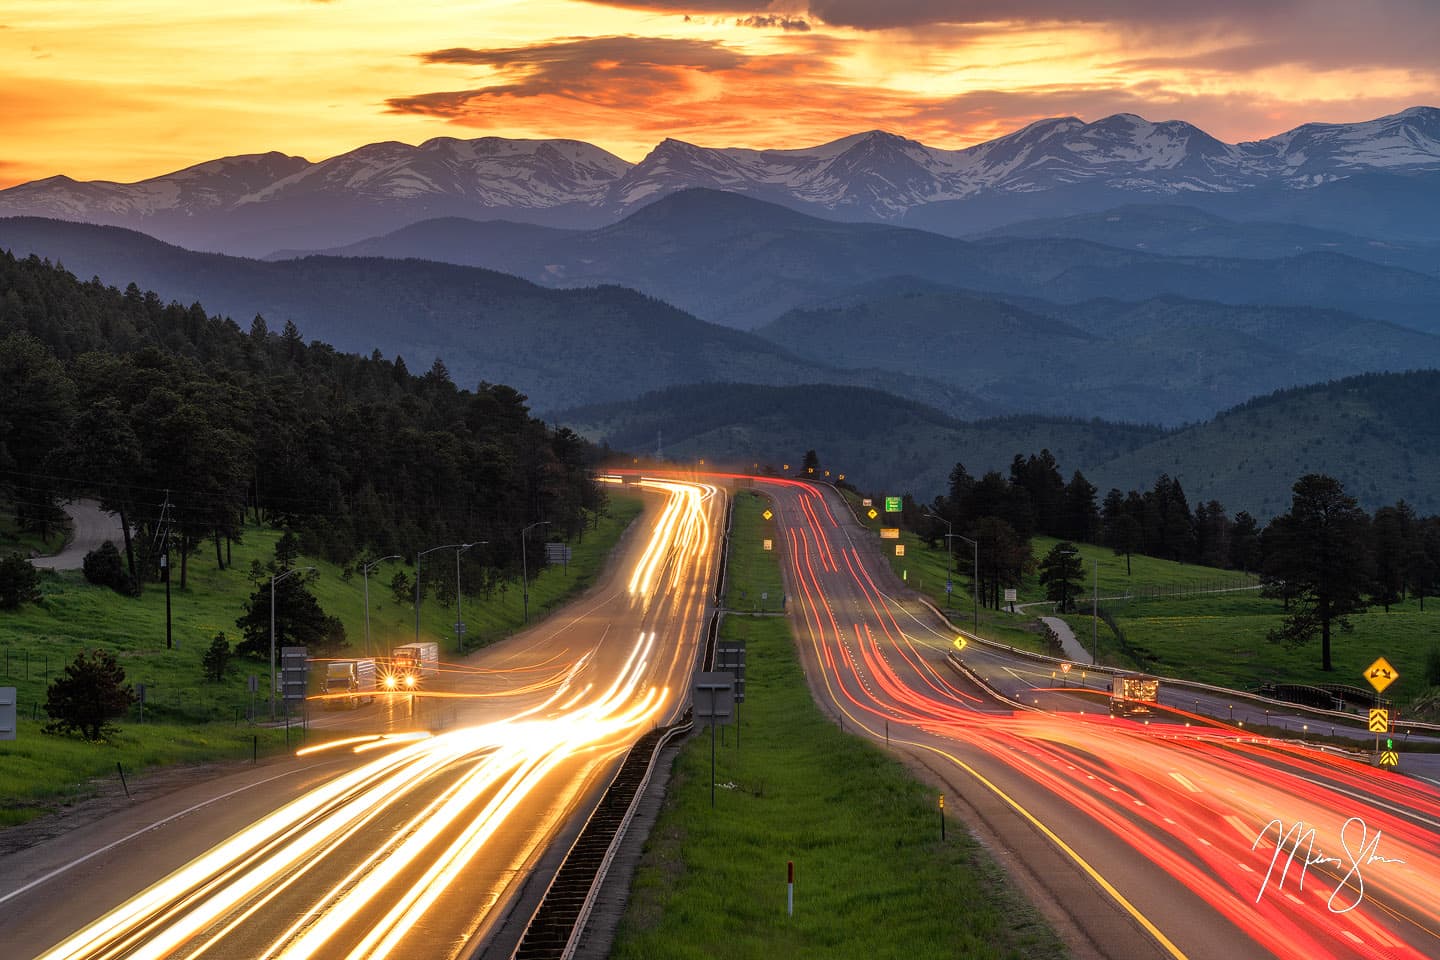 Sunset over I-70 and the Colorado Rockies